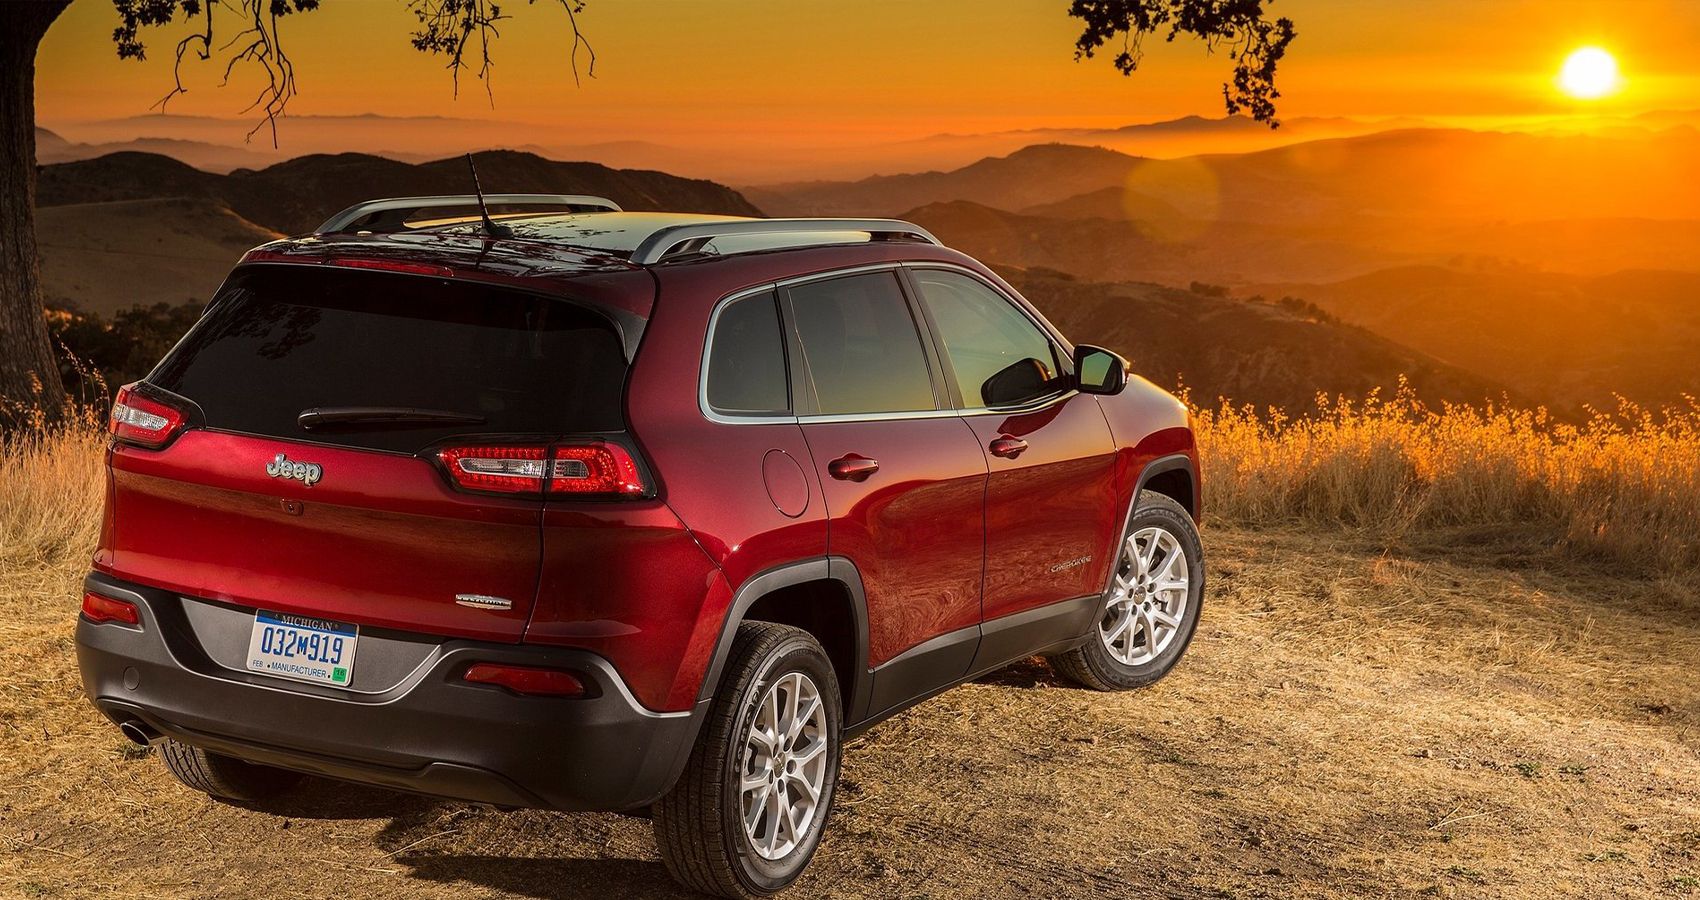 2014 Jeep Cherokee in Red Rear View